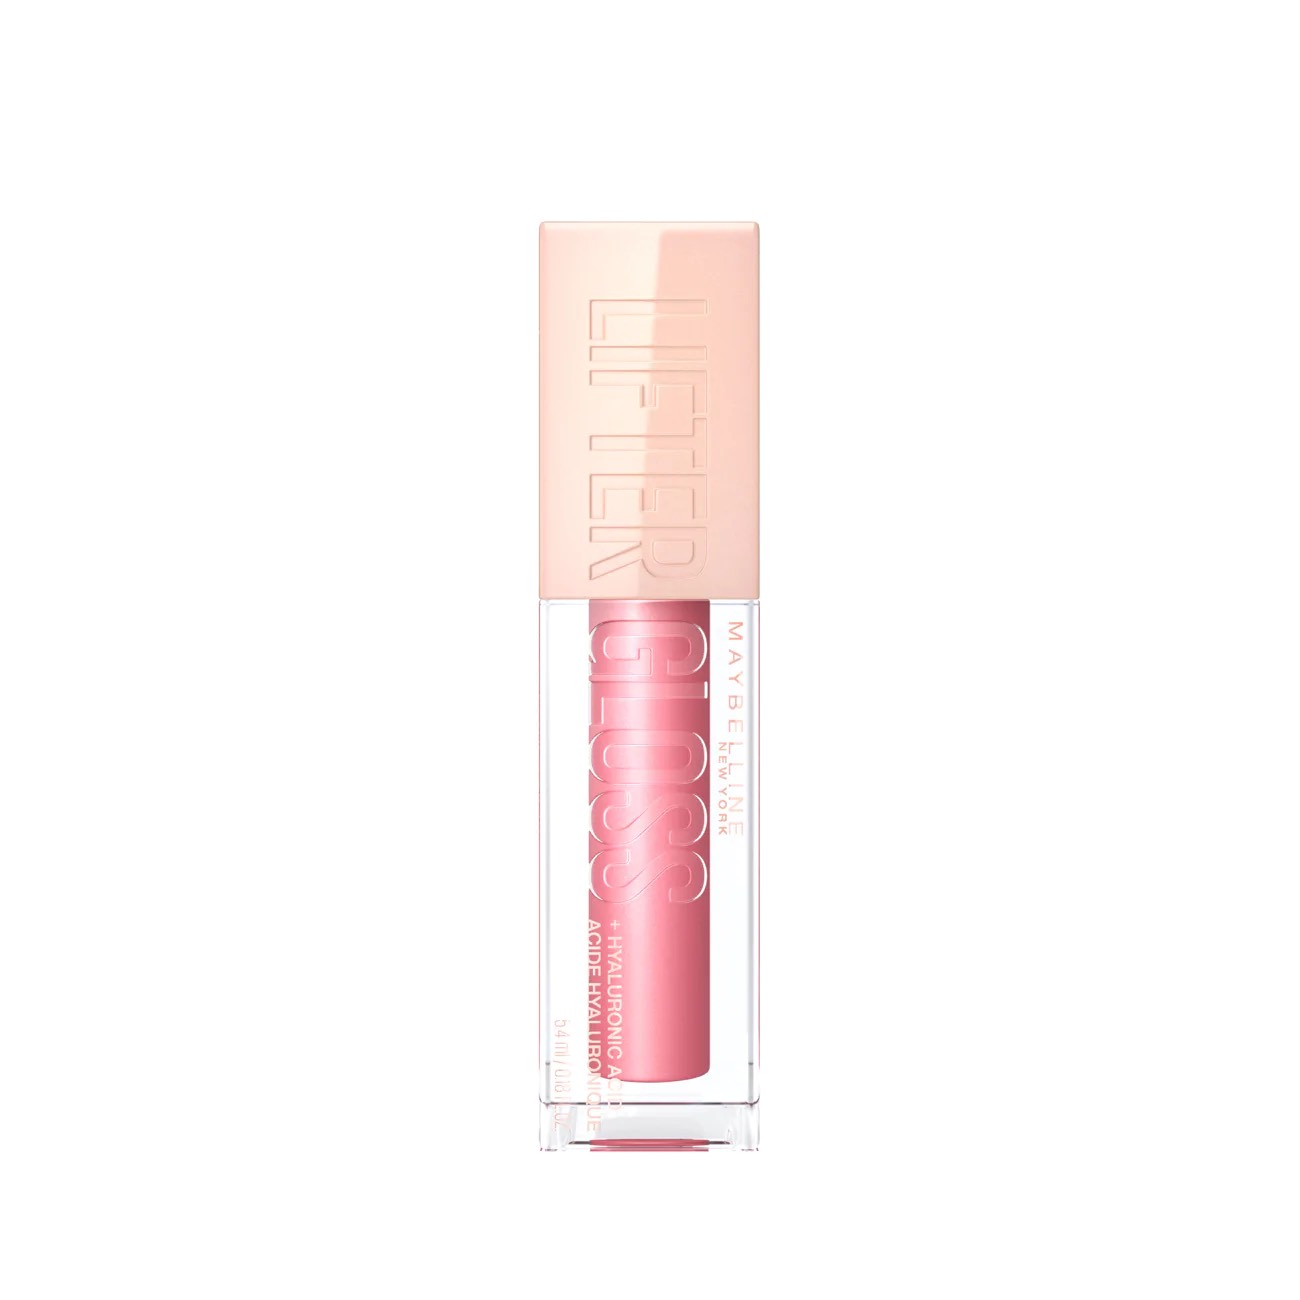 Son Maybelline Lifter Gloss - 005